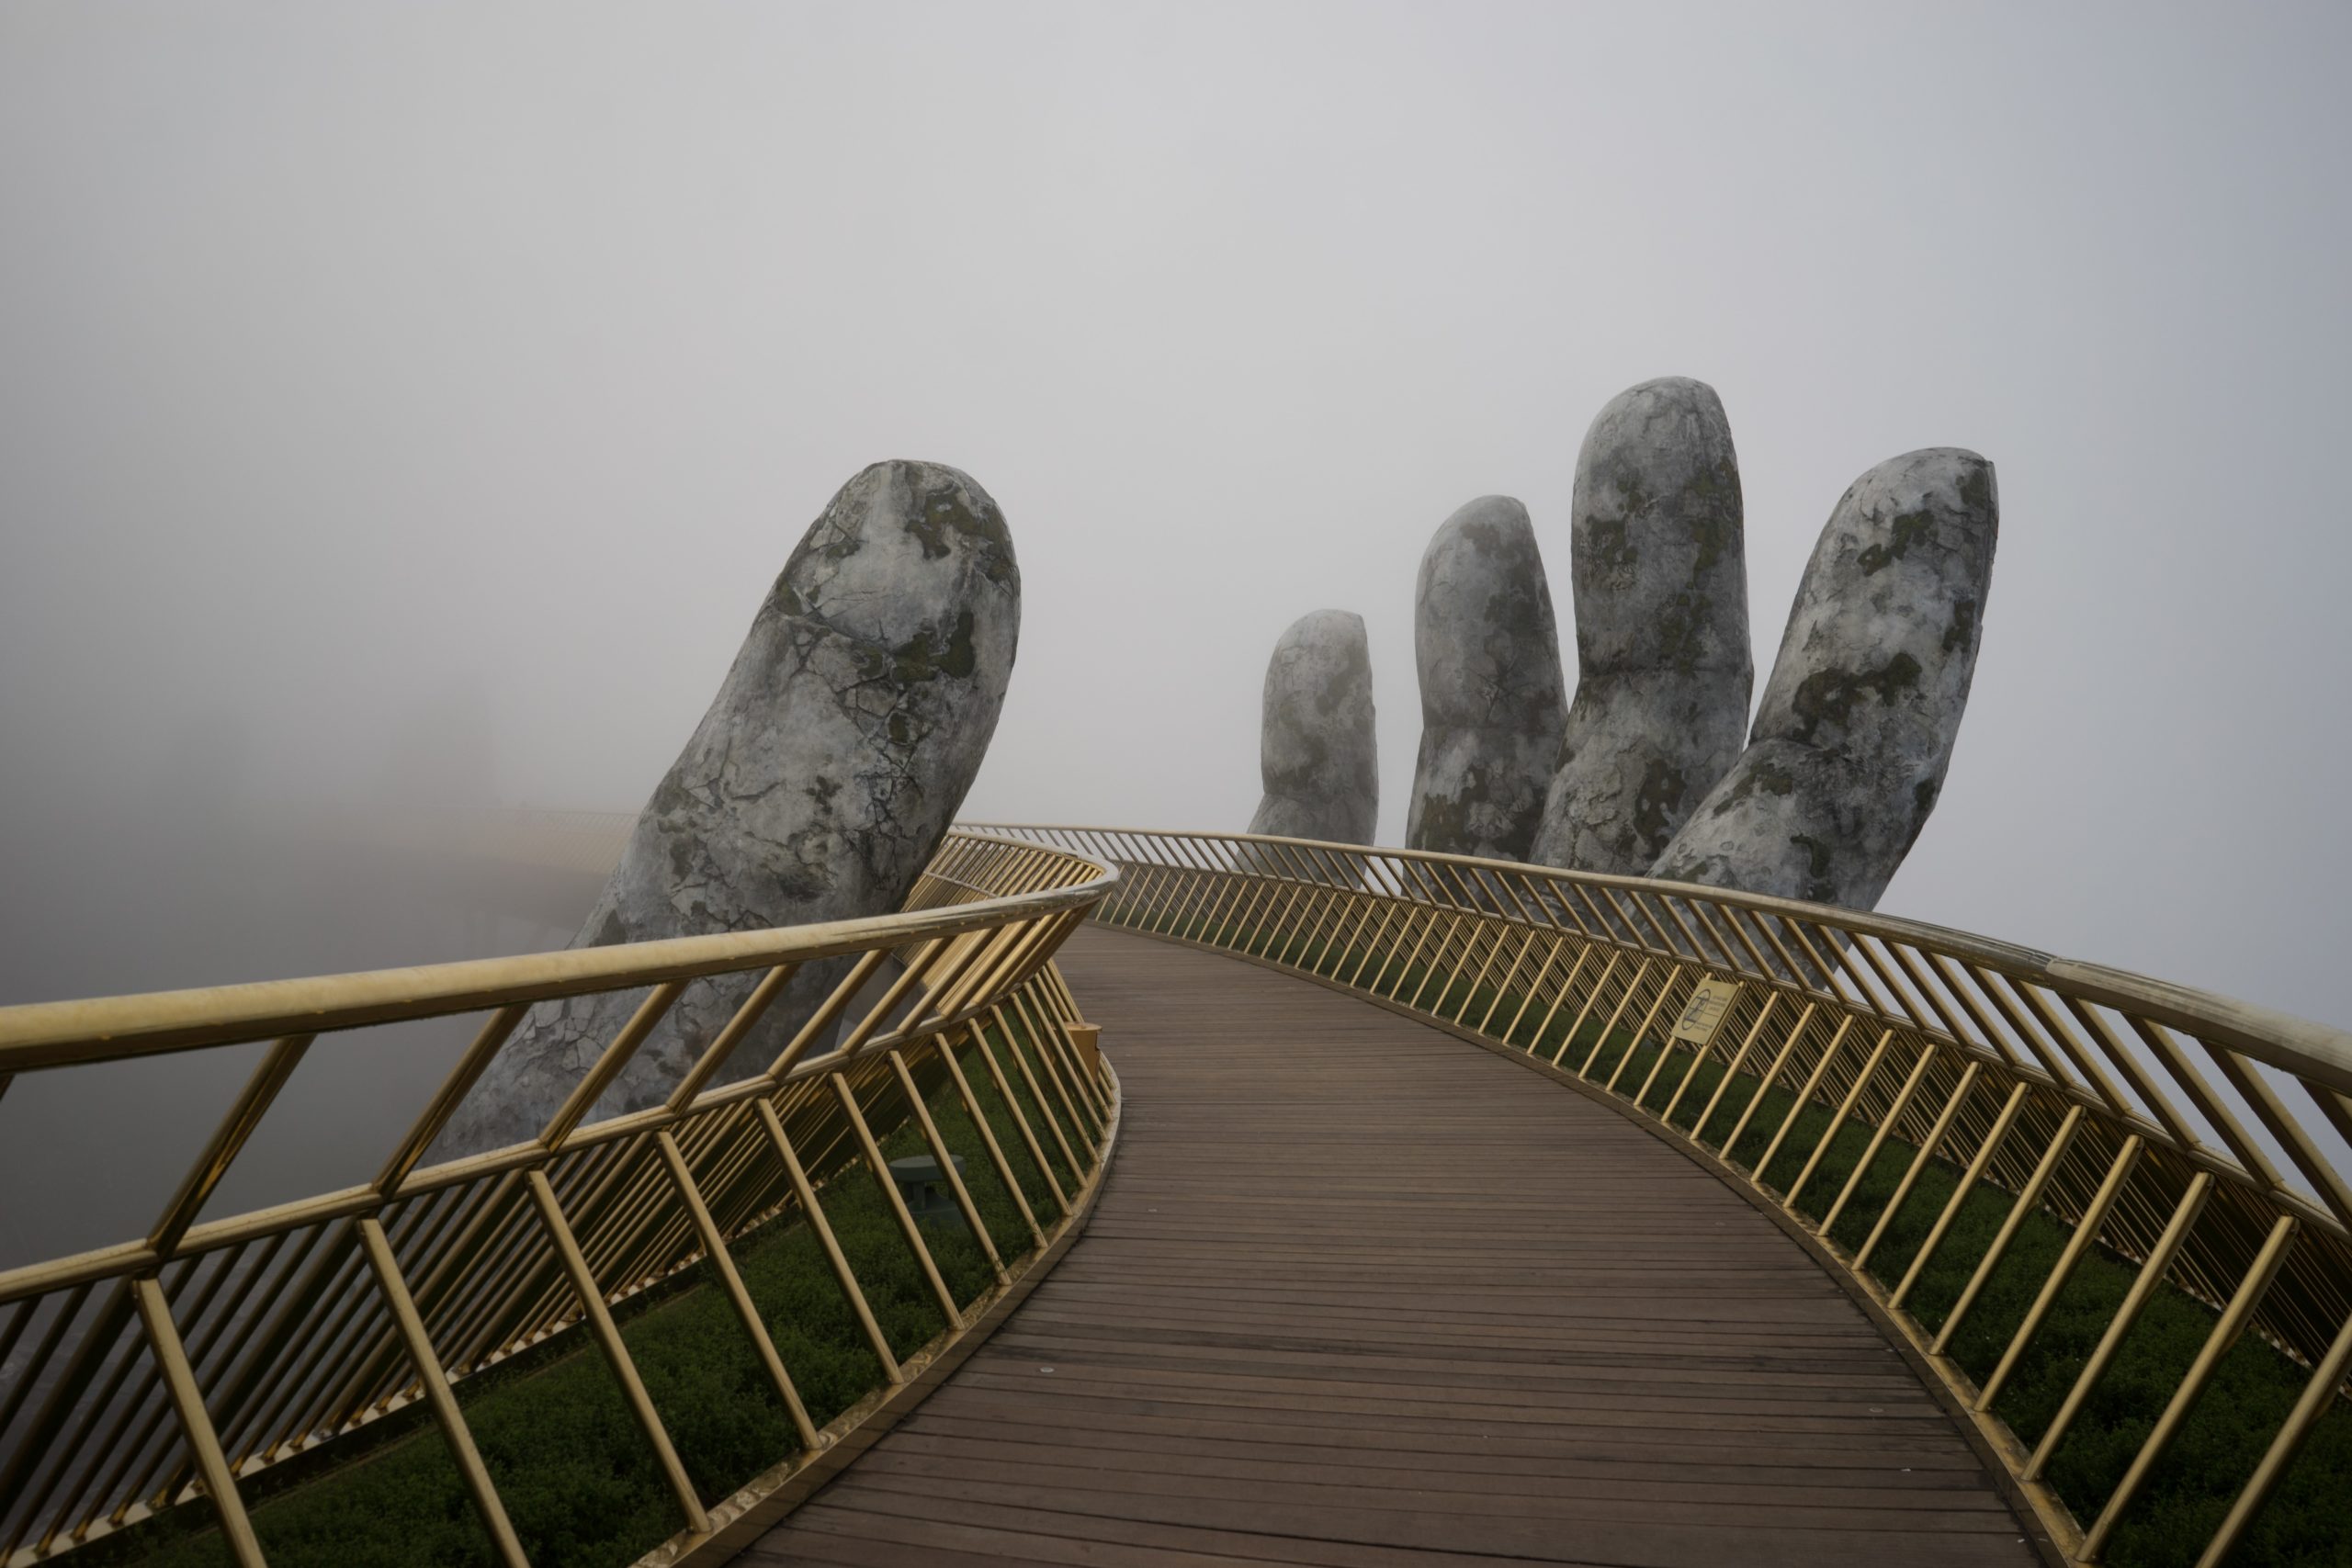 A footbridge in the fog. The bridge is held up by a concrete hand.